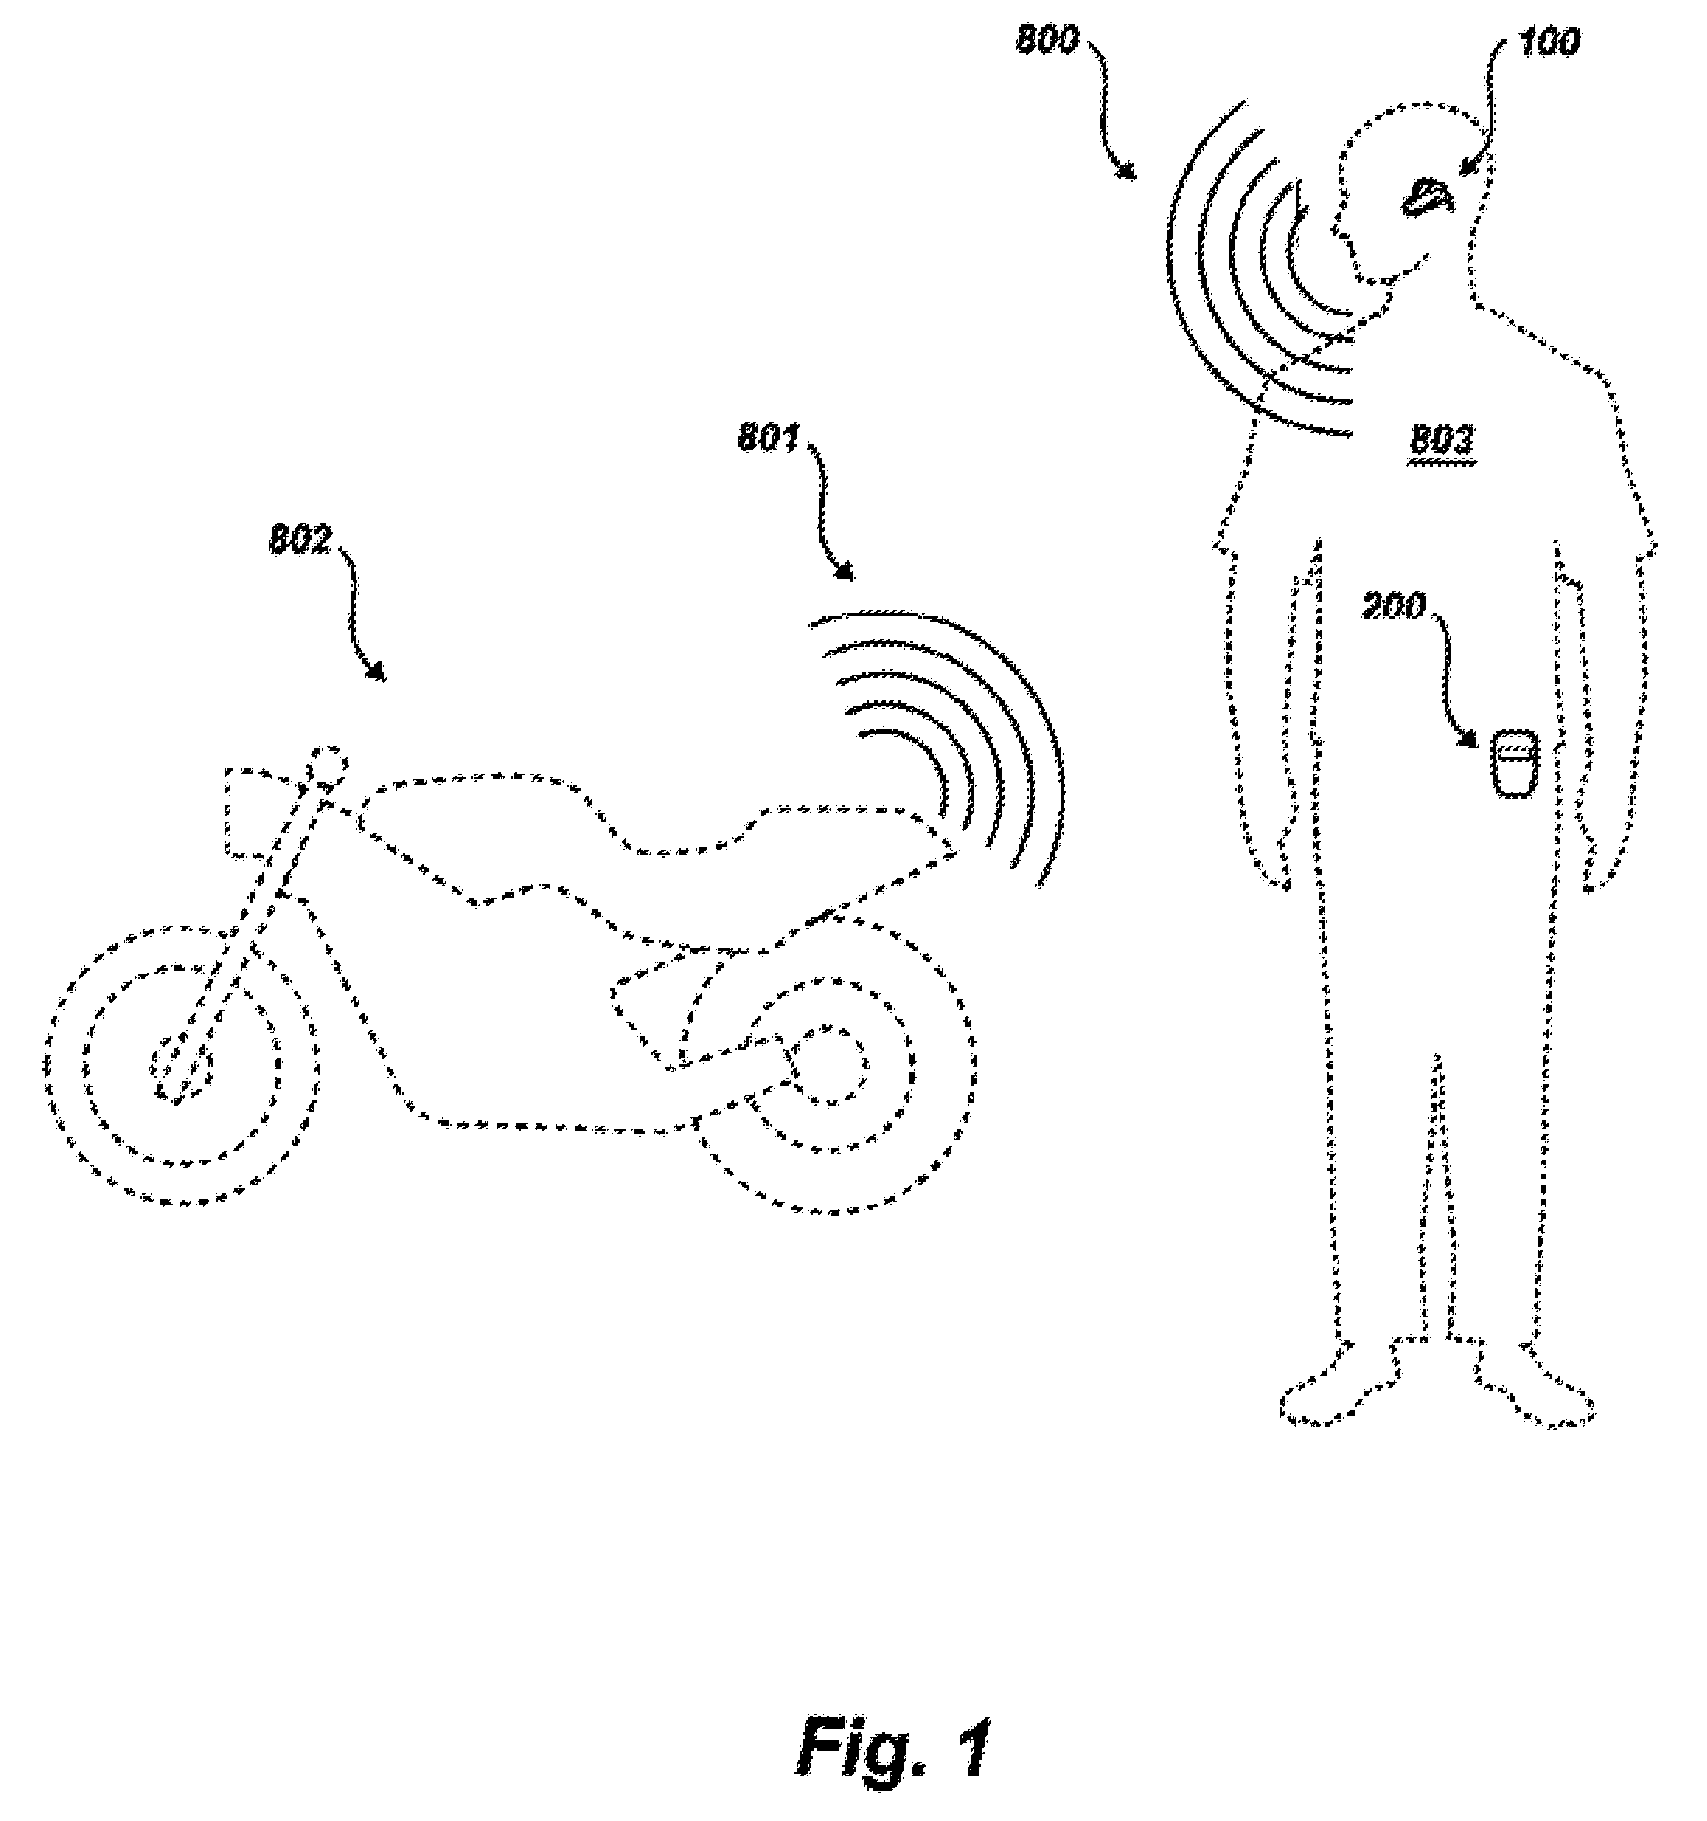 Noise reduction system and method suitable for hands free communication devices